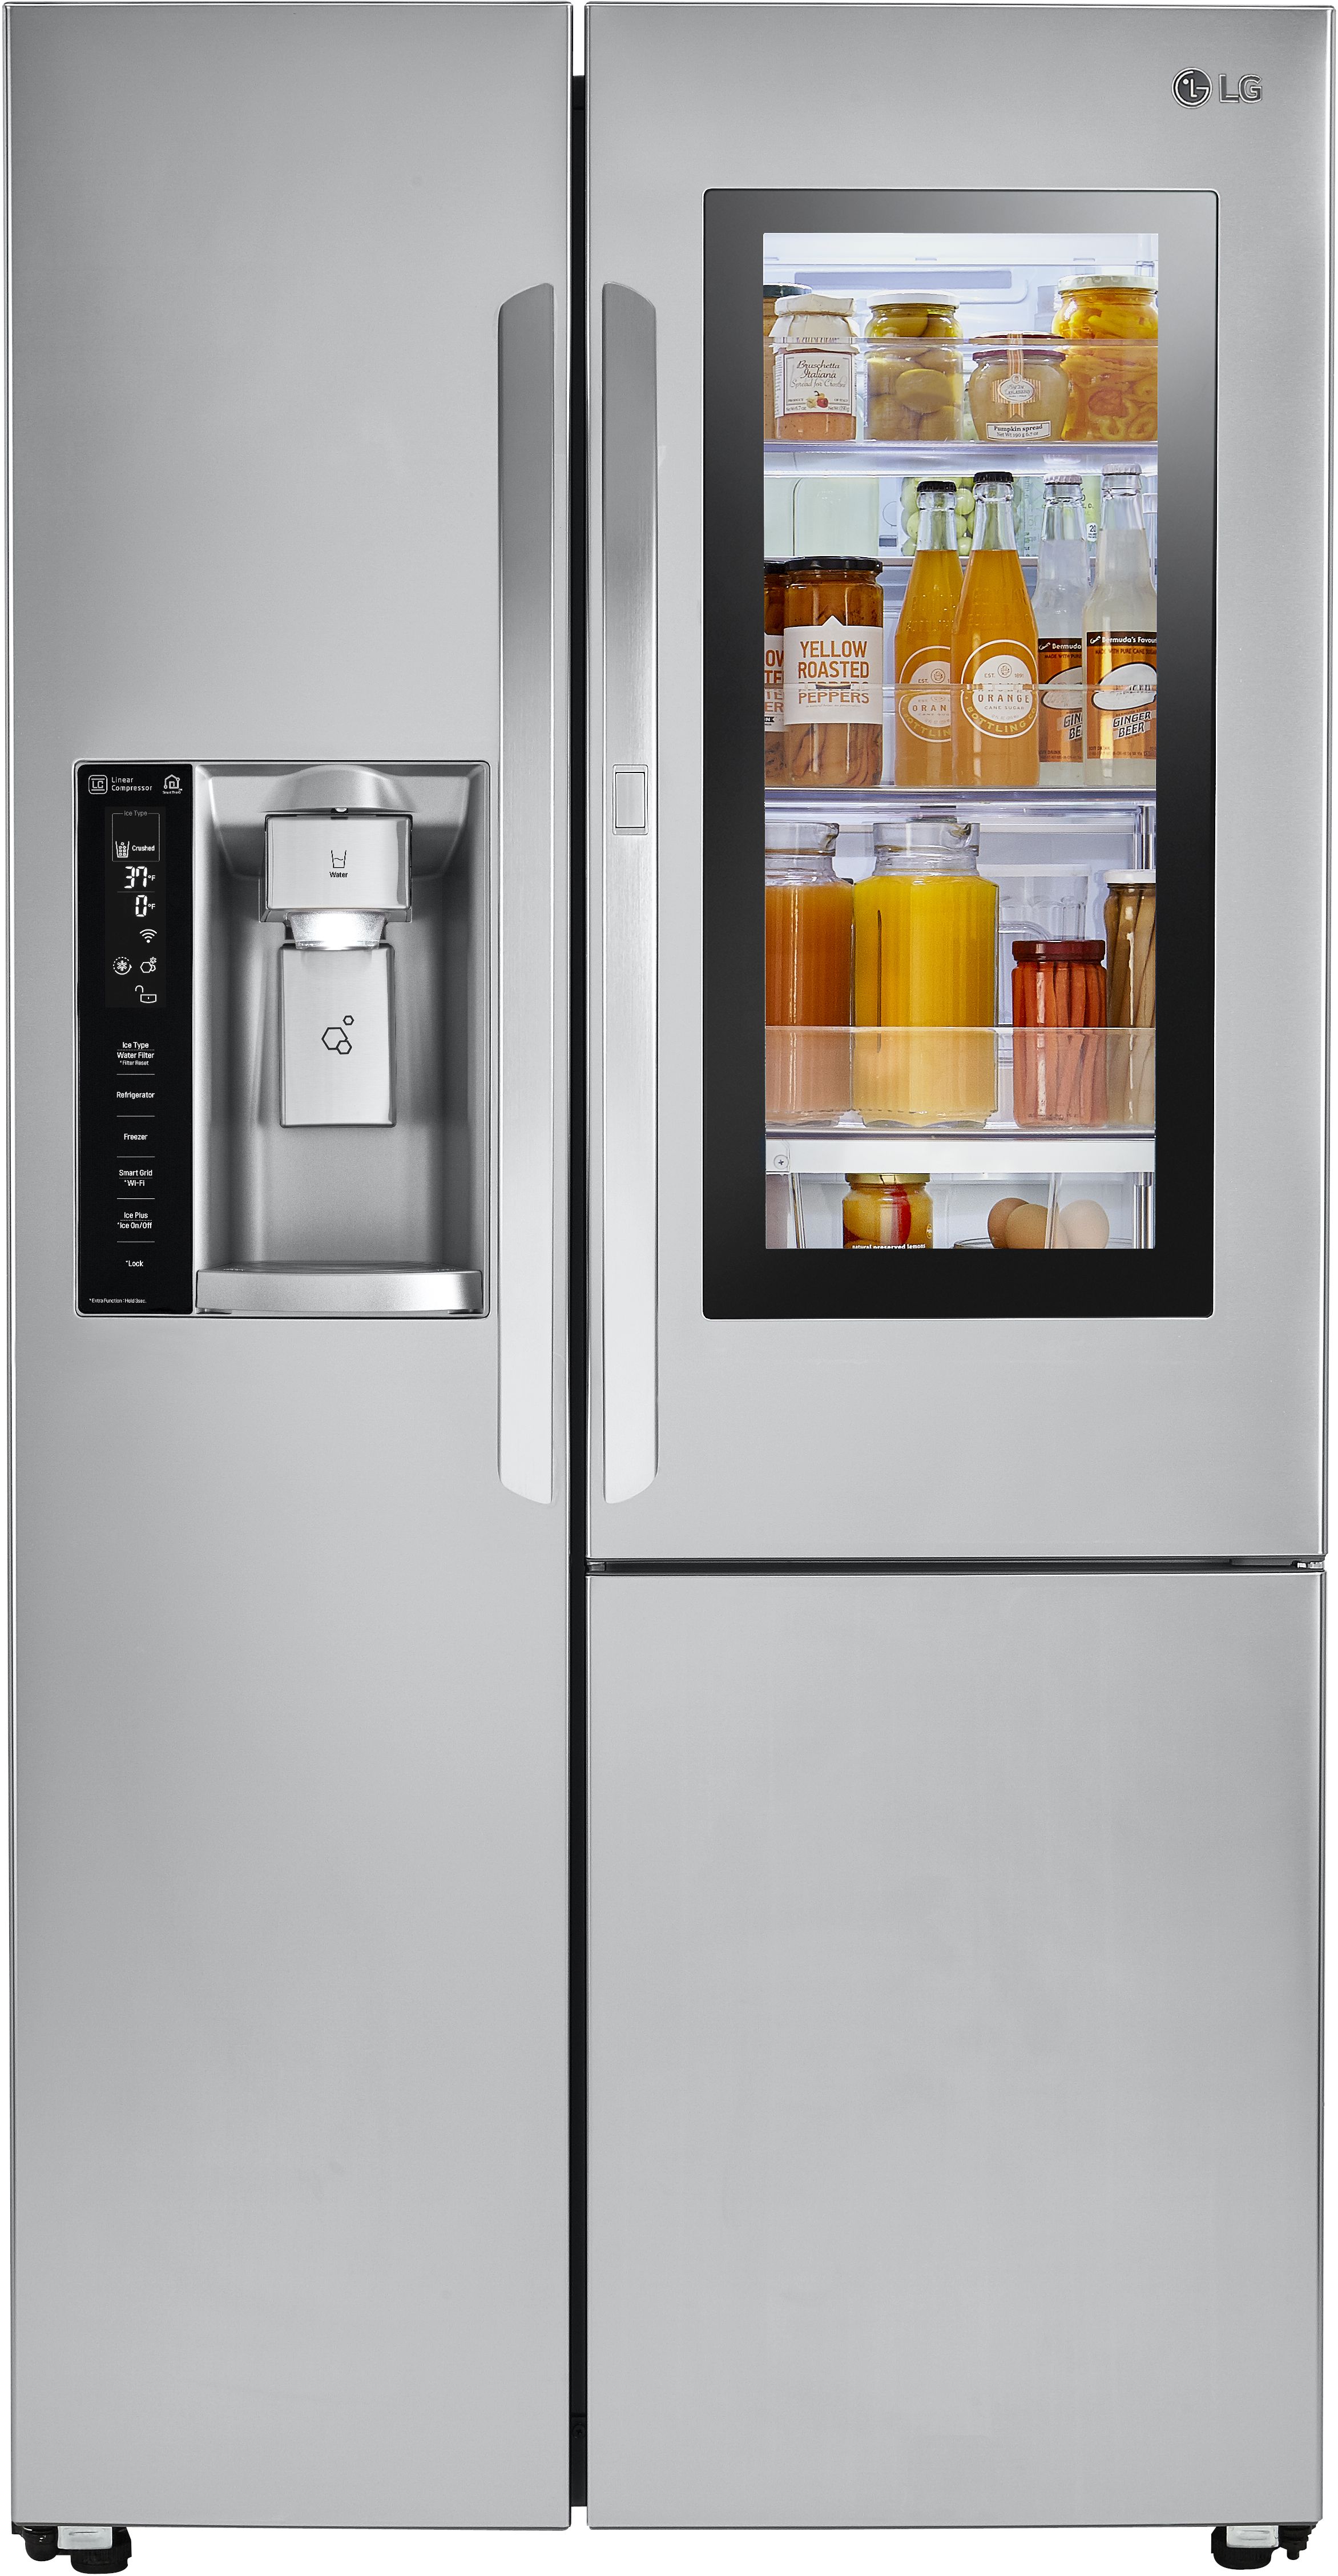 LG 26.1 Cu. Ft. Stainless Steel Side-By-Side Refrigerator-LSXS26396S